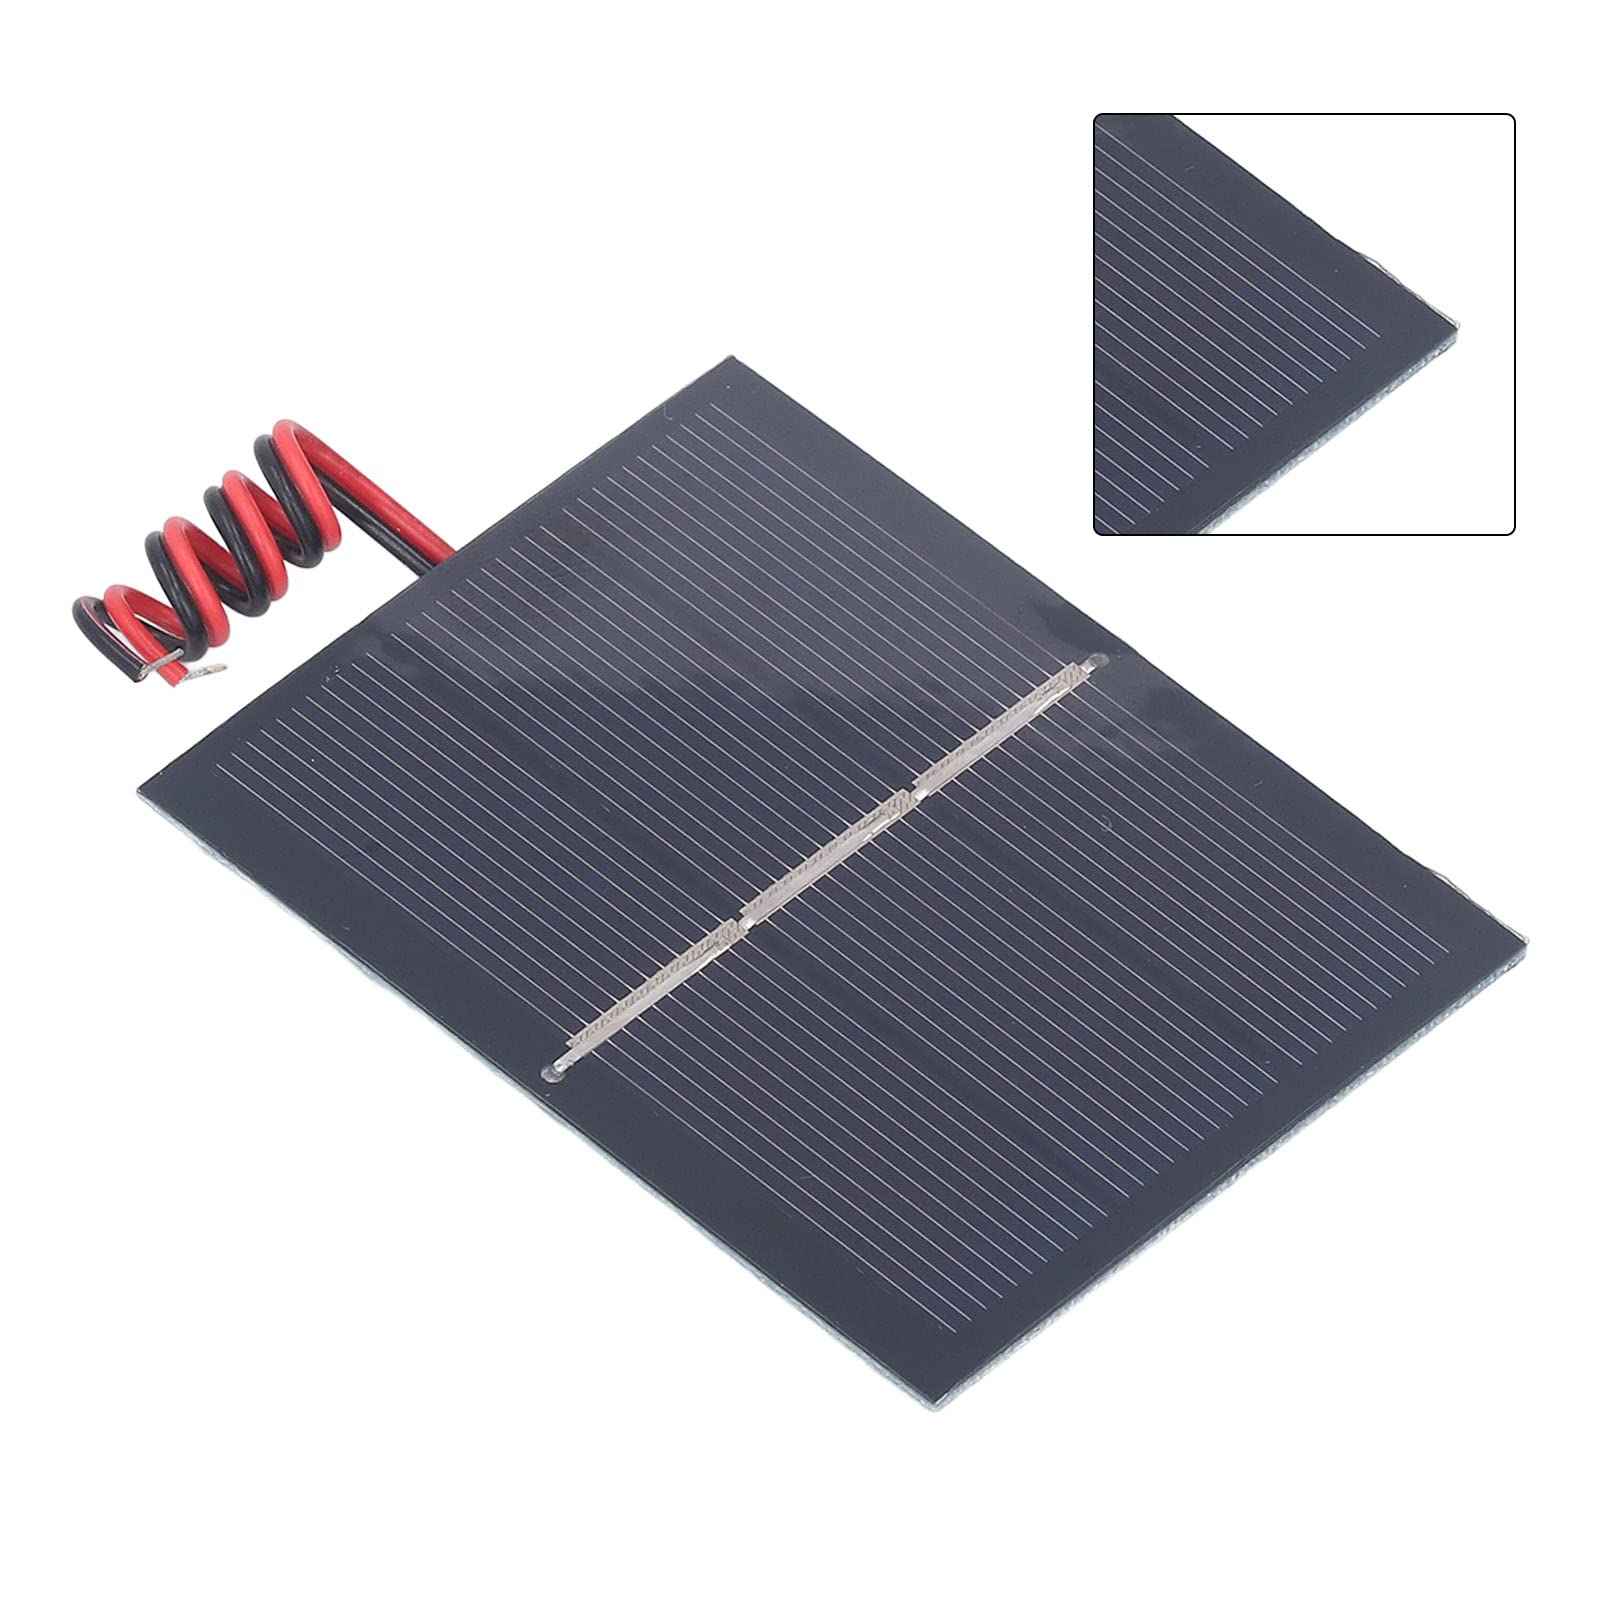 Mini Solar Panel 0.65W 1.5V DIY Plate Solar Panel Charger Kit with Wire for Portable Power Supply